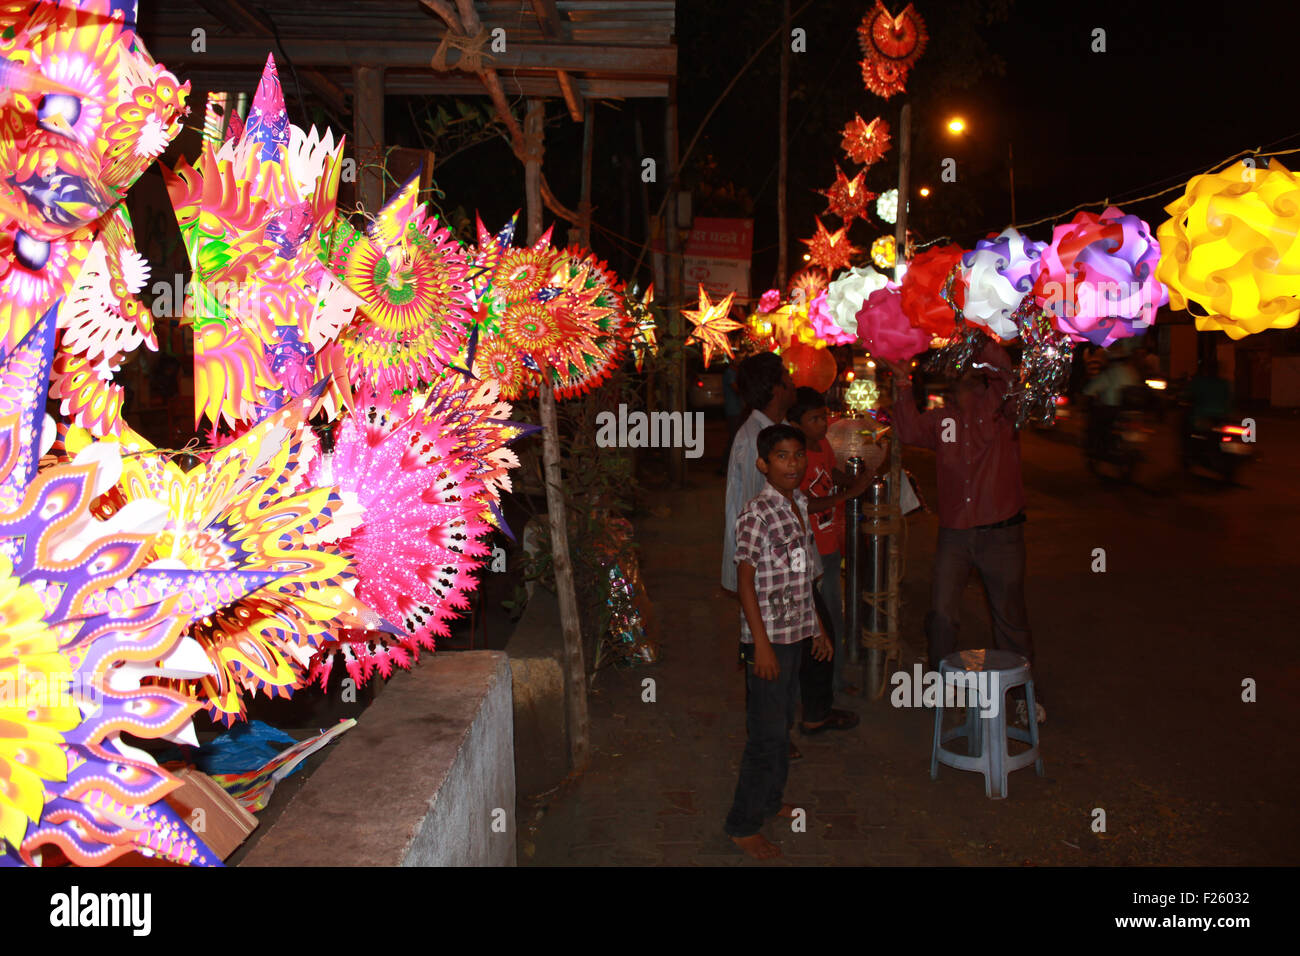 Street side shop selling traditional lanterns on the occasion of Diwali festival in India Stock Photo